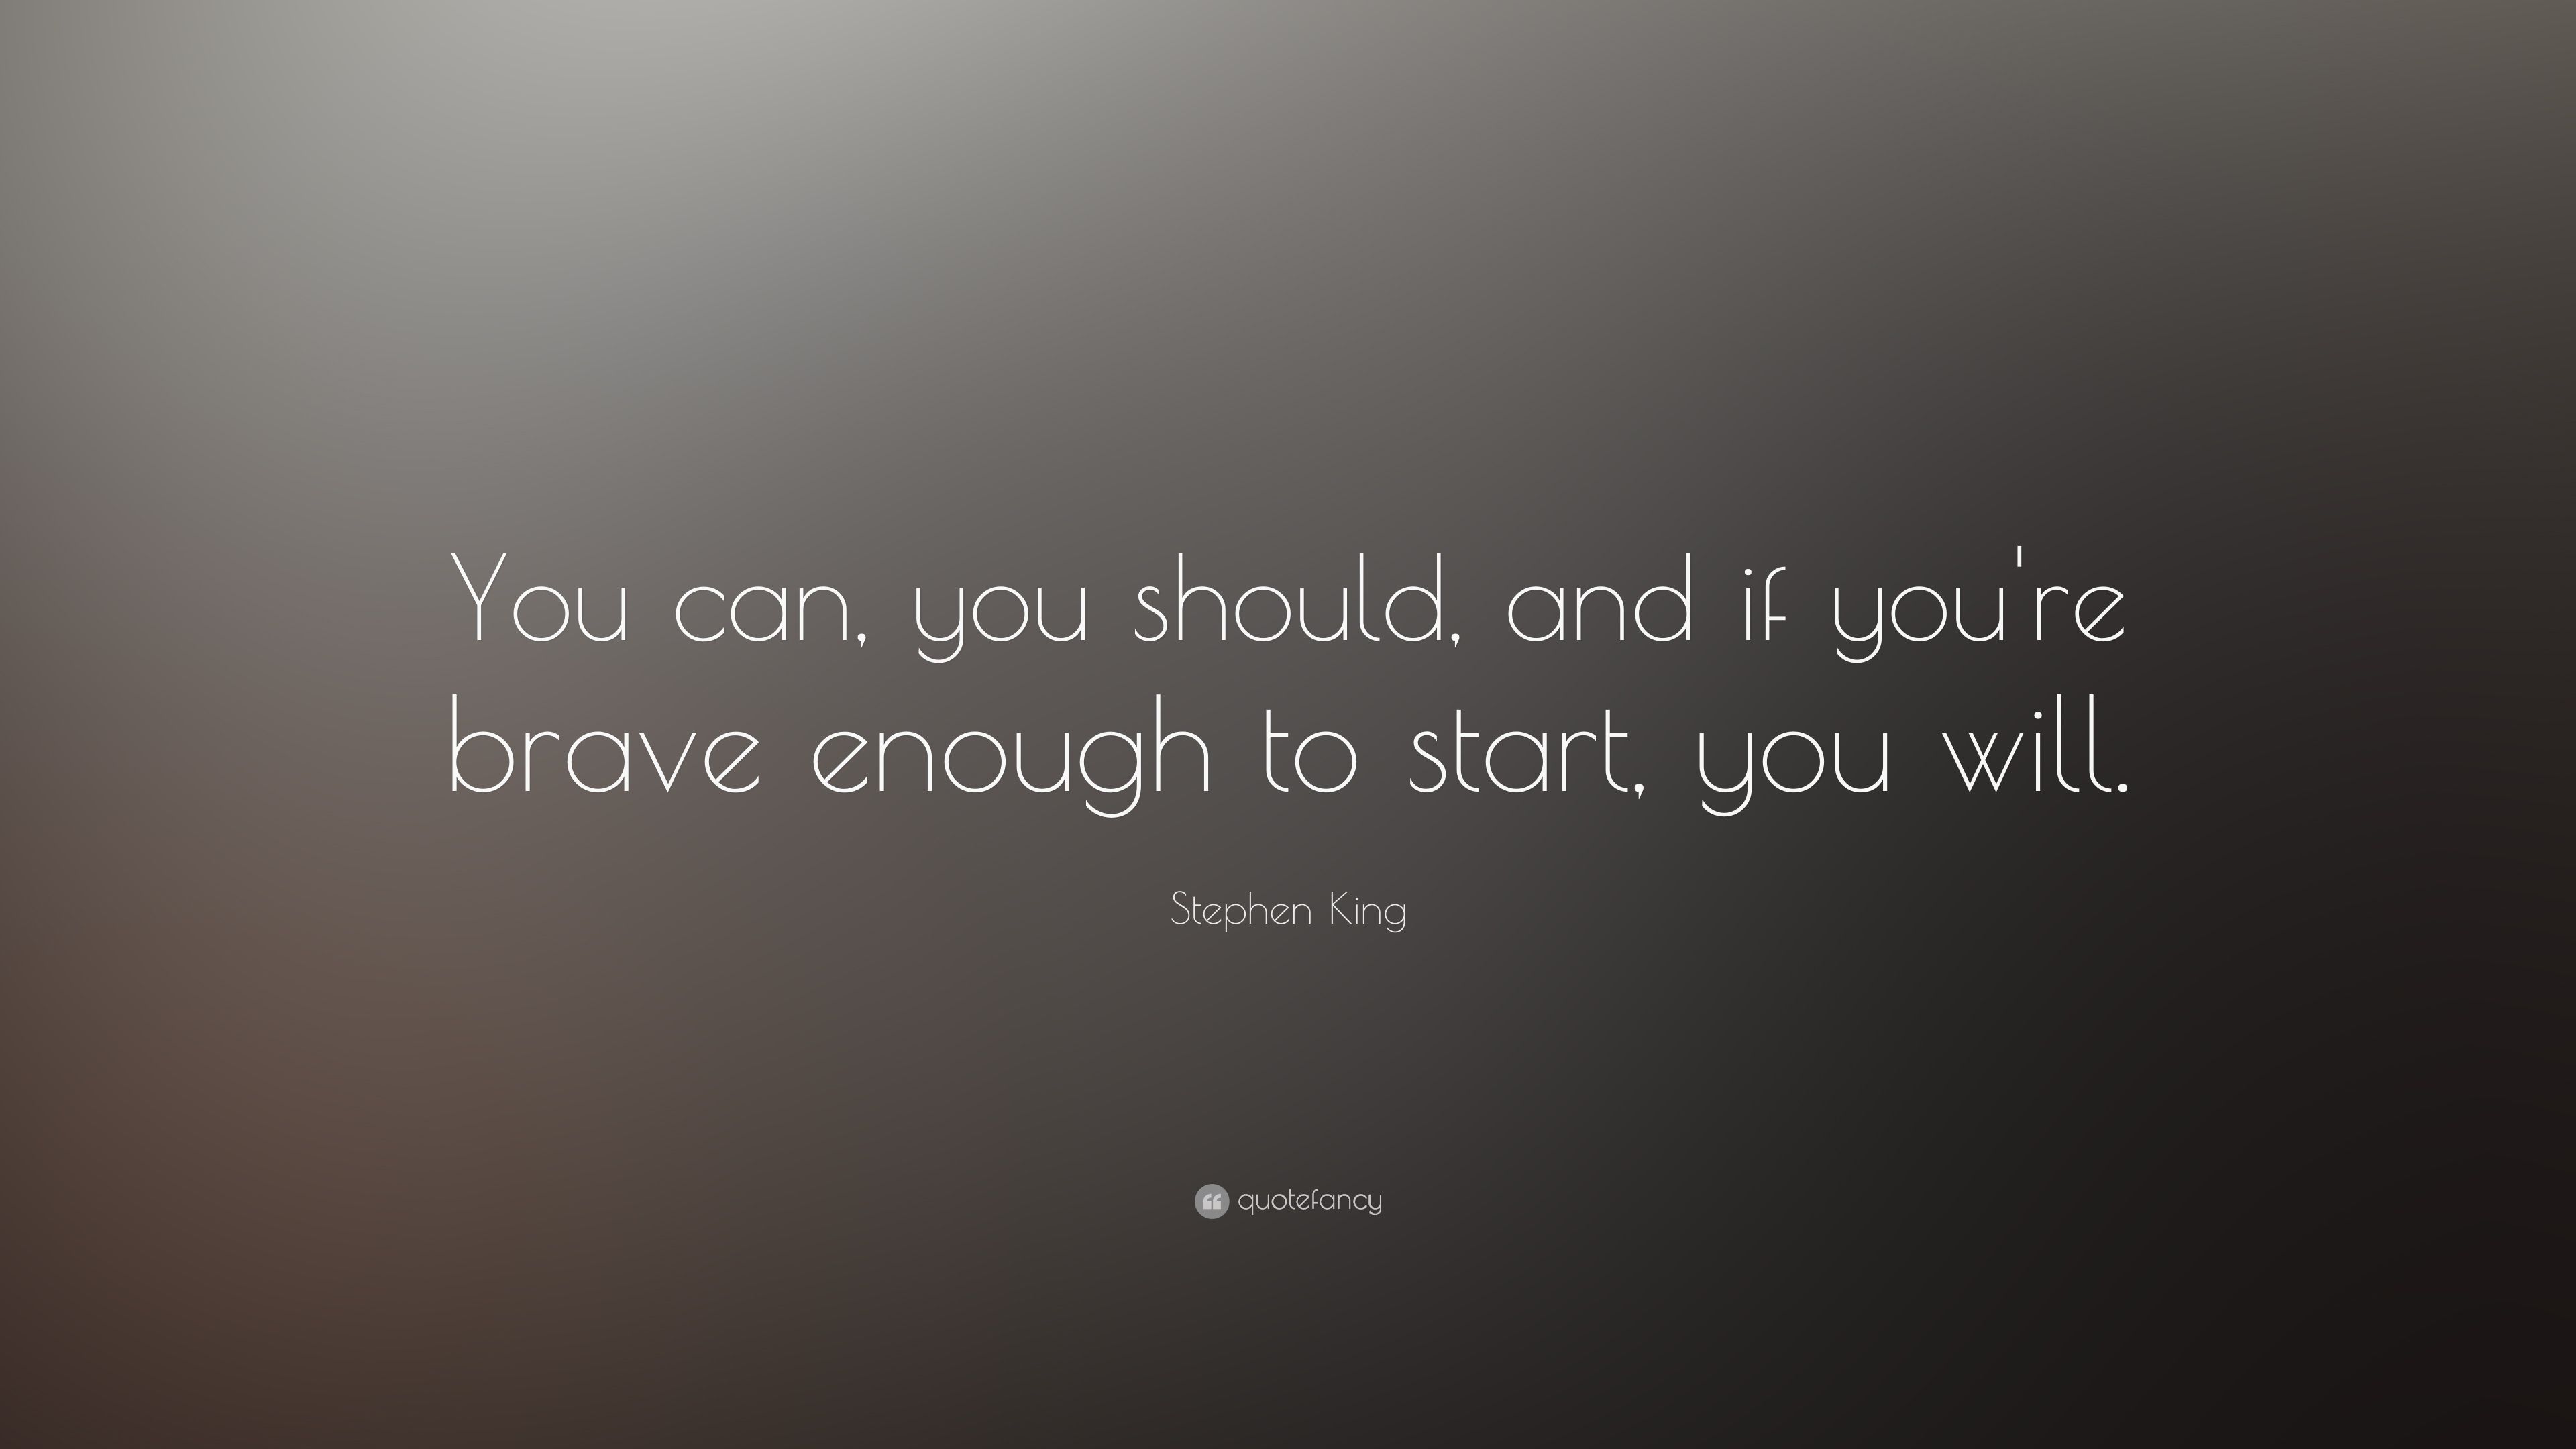 Stephen King Quotes (18 wallpapers) - Quotefancy